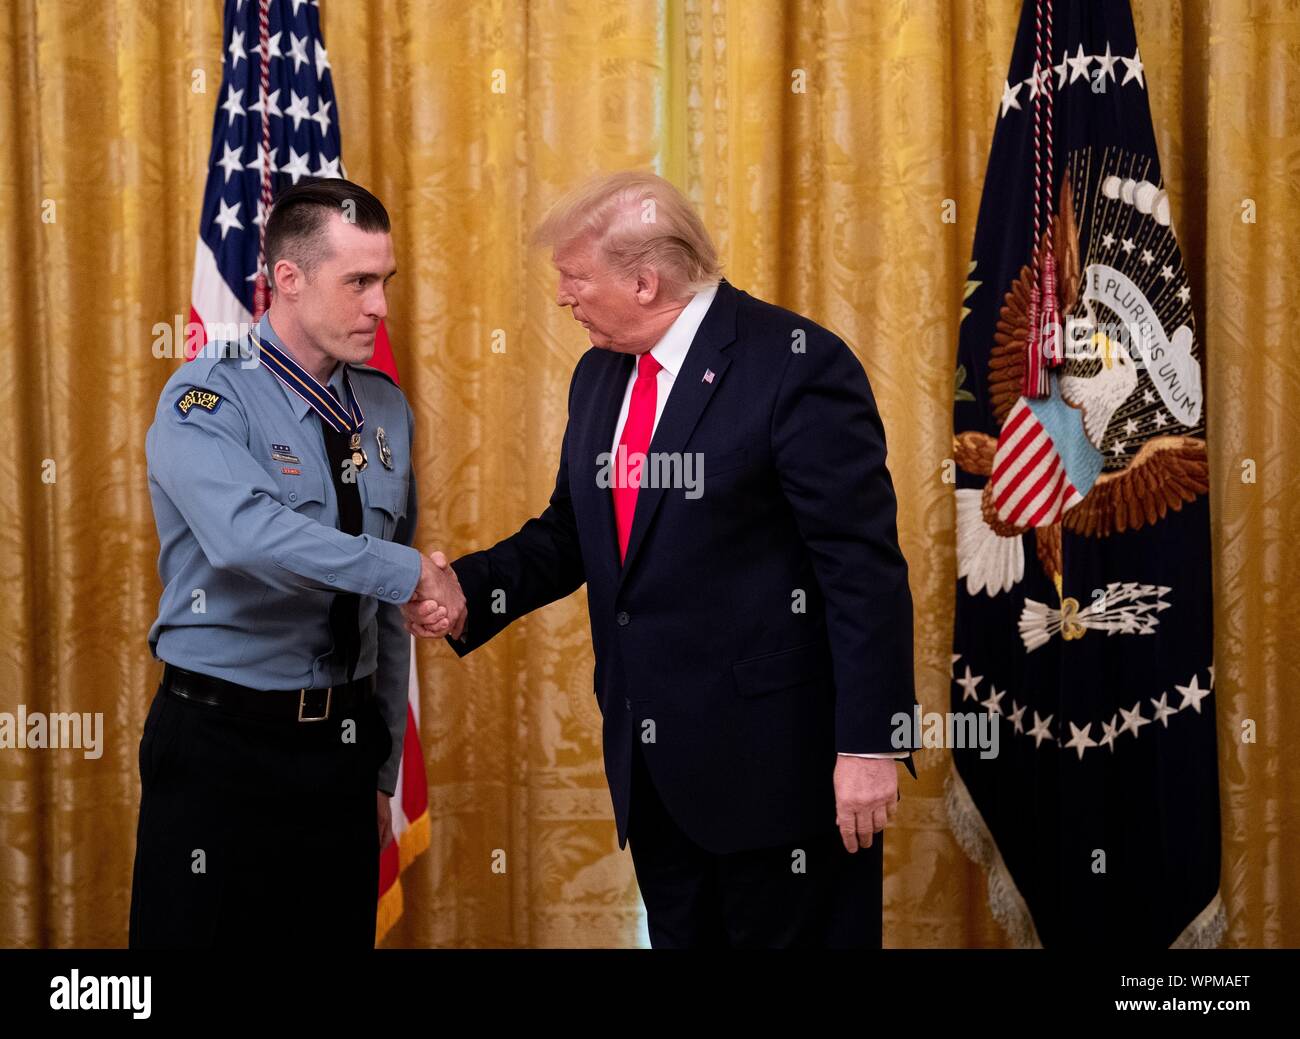 Washington, United States. 09th Sep, 2019. President Donald Trump awards Dayton Police Officer David Denlinger the Public Safety Officer Medal of Valor, during a ceremony in the East Room at the White House in Washington, DC on Monday, September 9, 2019. Trump recognized the six Dayton officers who stoped a mass shooting on August 4th and honored 5 civilians who helped during a mass shooting at a Walmart in El Paso a day before. Photo by Kevin Dietsch/UPI Credit: UPI/Alamy Live News Stock Photo